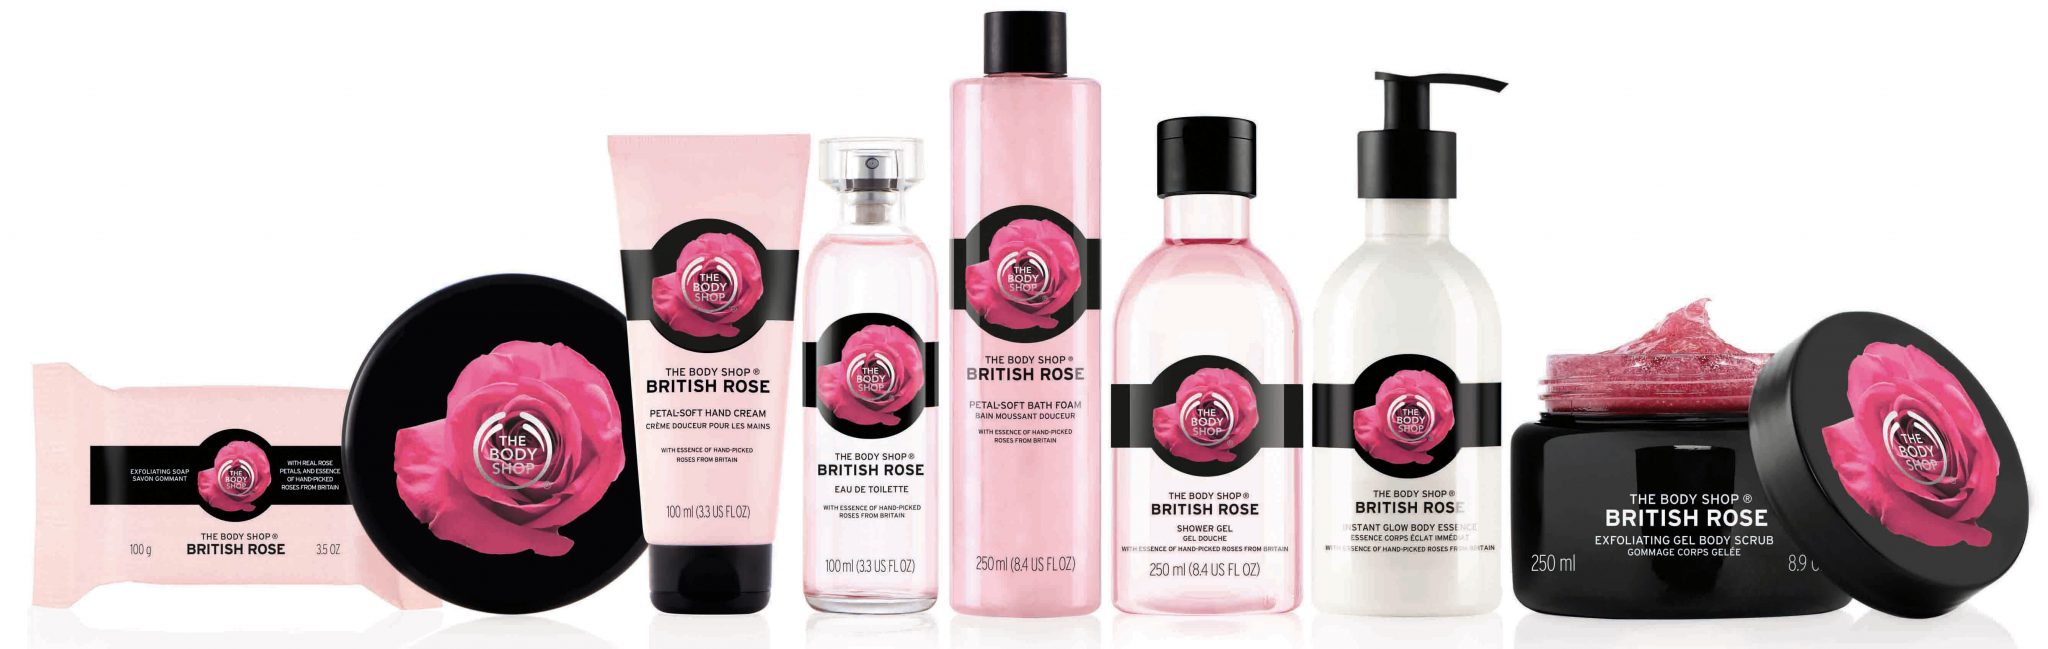 Body Shop British Rose Collection Review